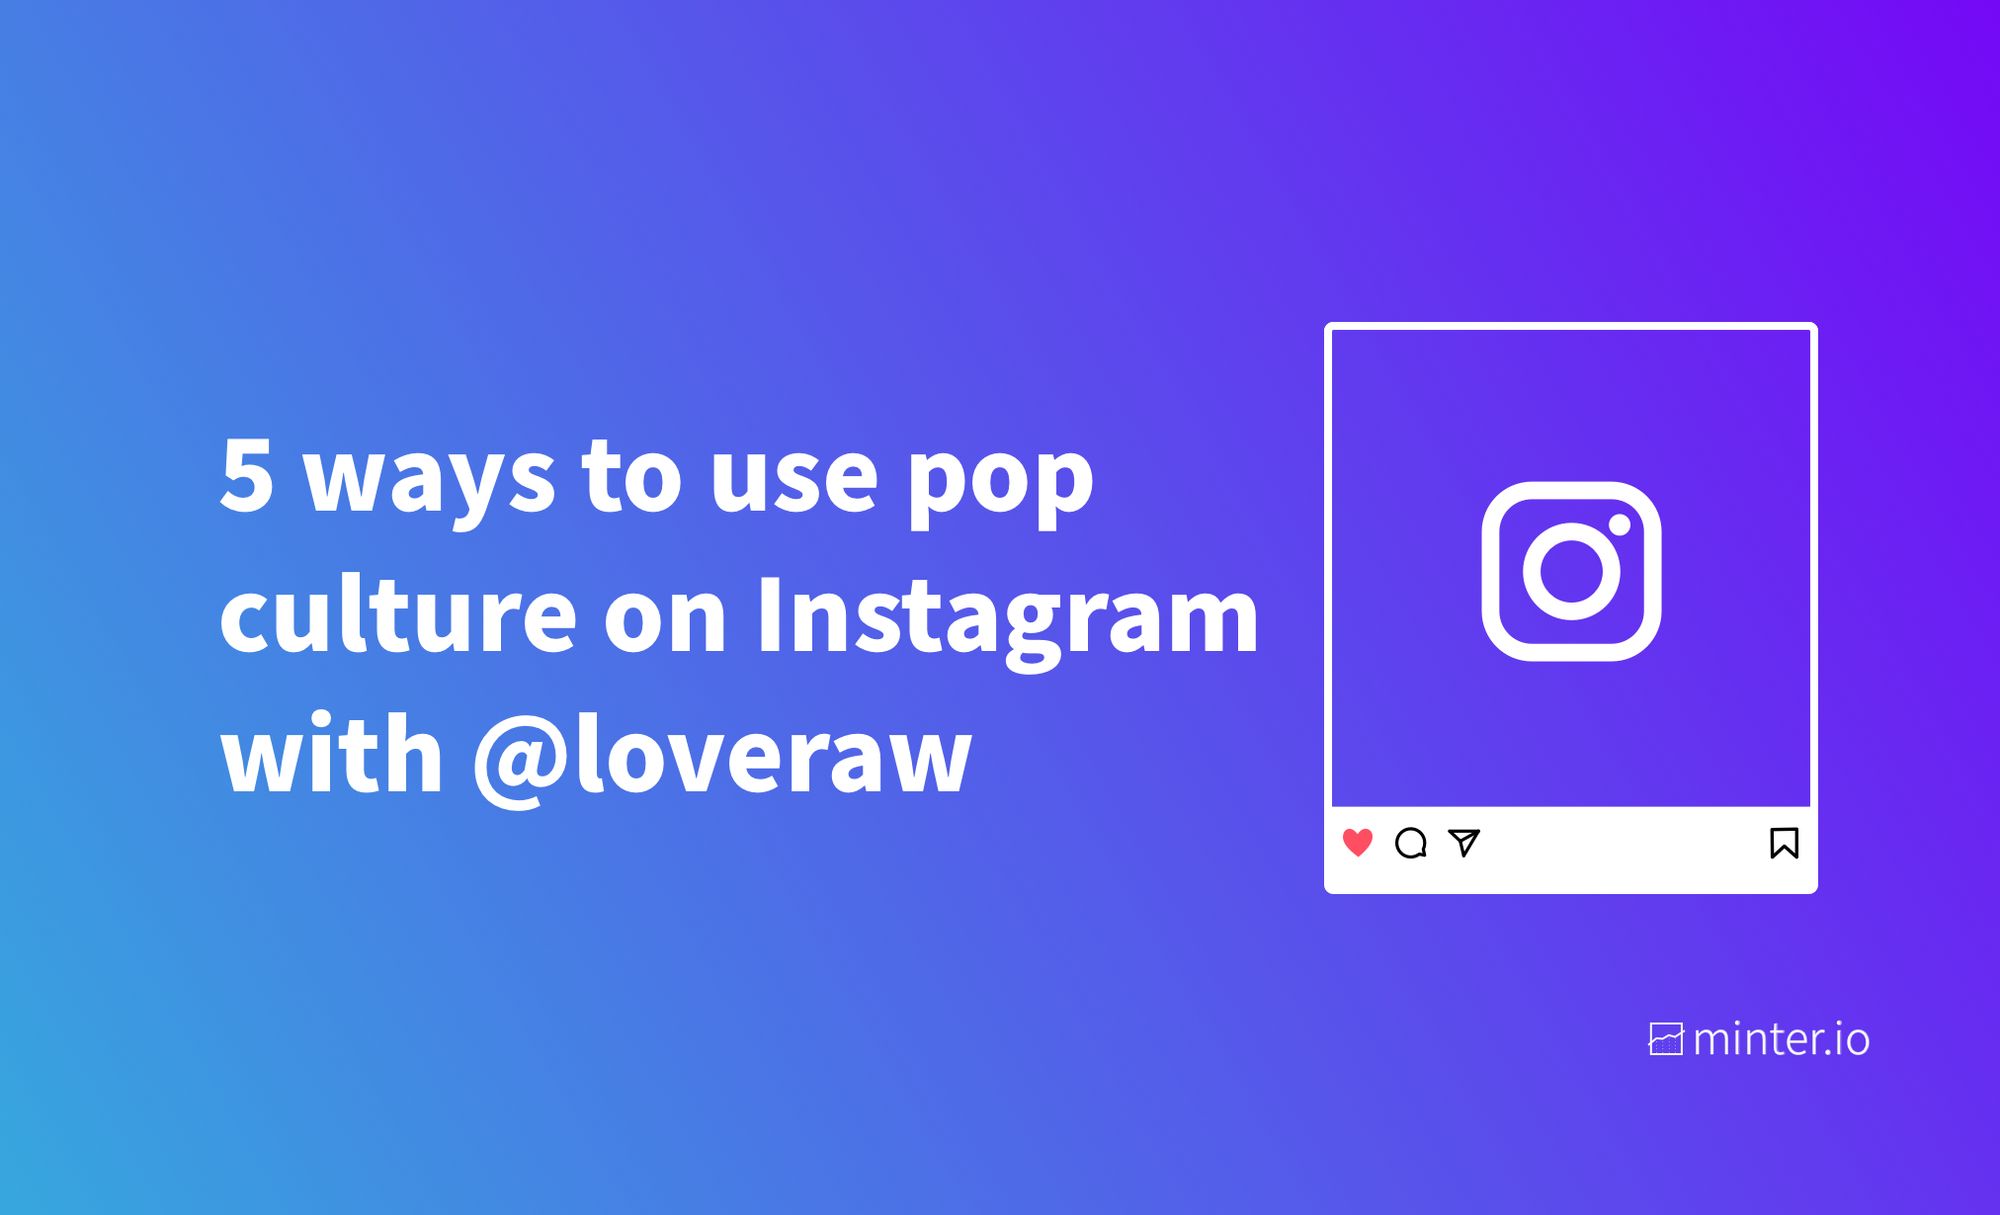 5 ways to use pop culture on Instagram with @loveraw - Minter.io ...